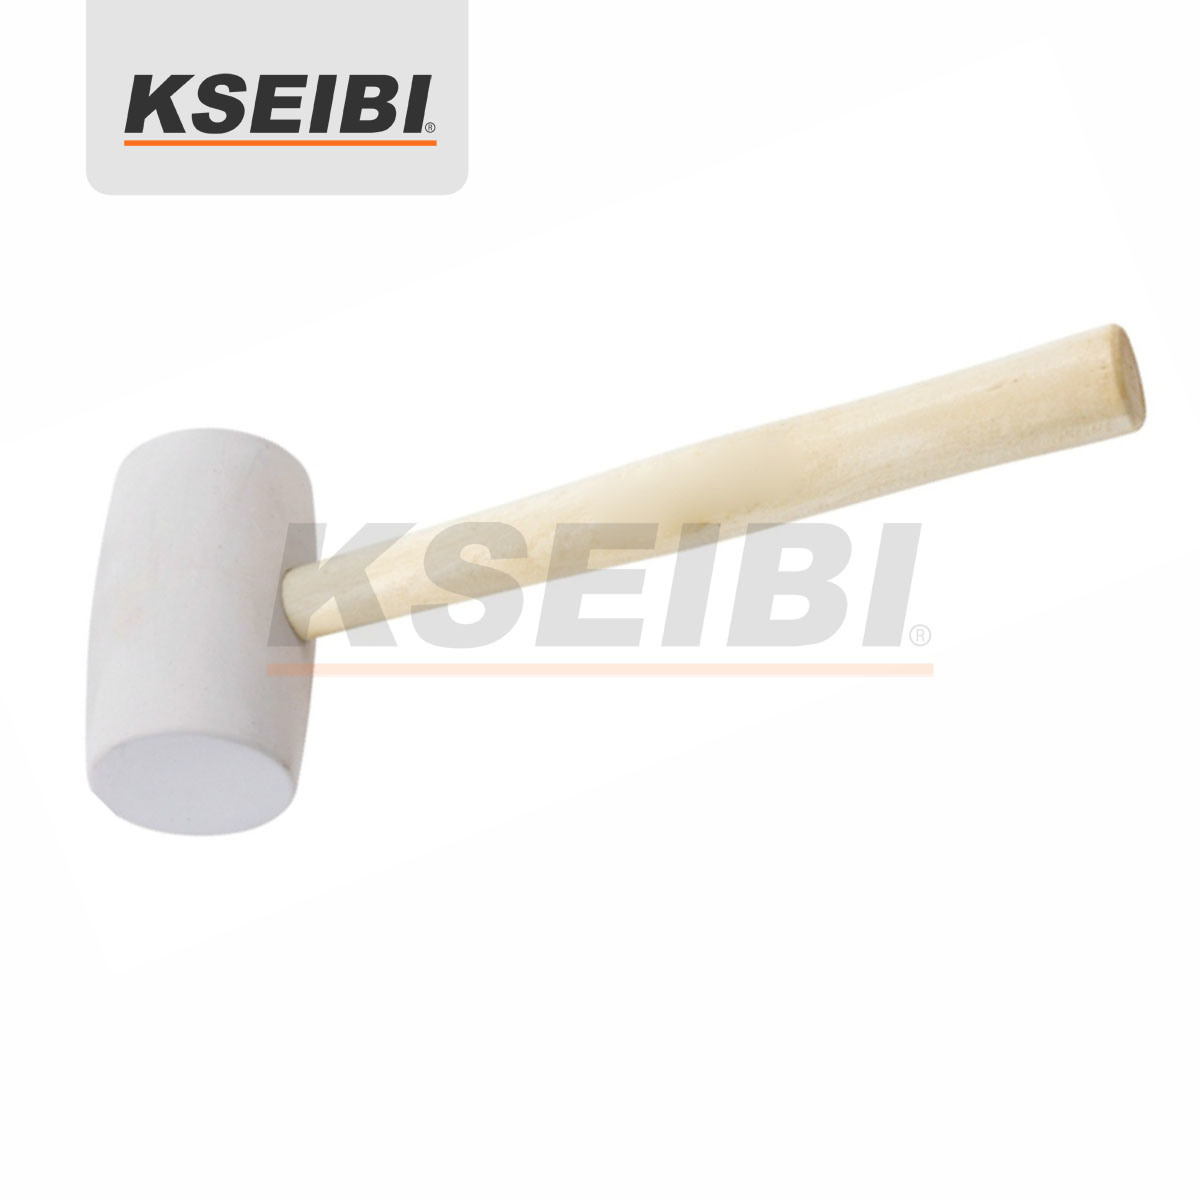 Kseibi White Head Rubber Mallet Hammer with Wooden Handle